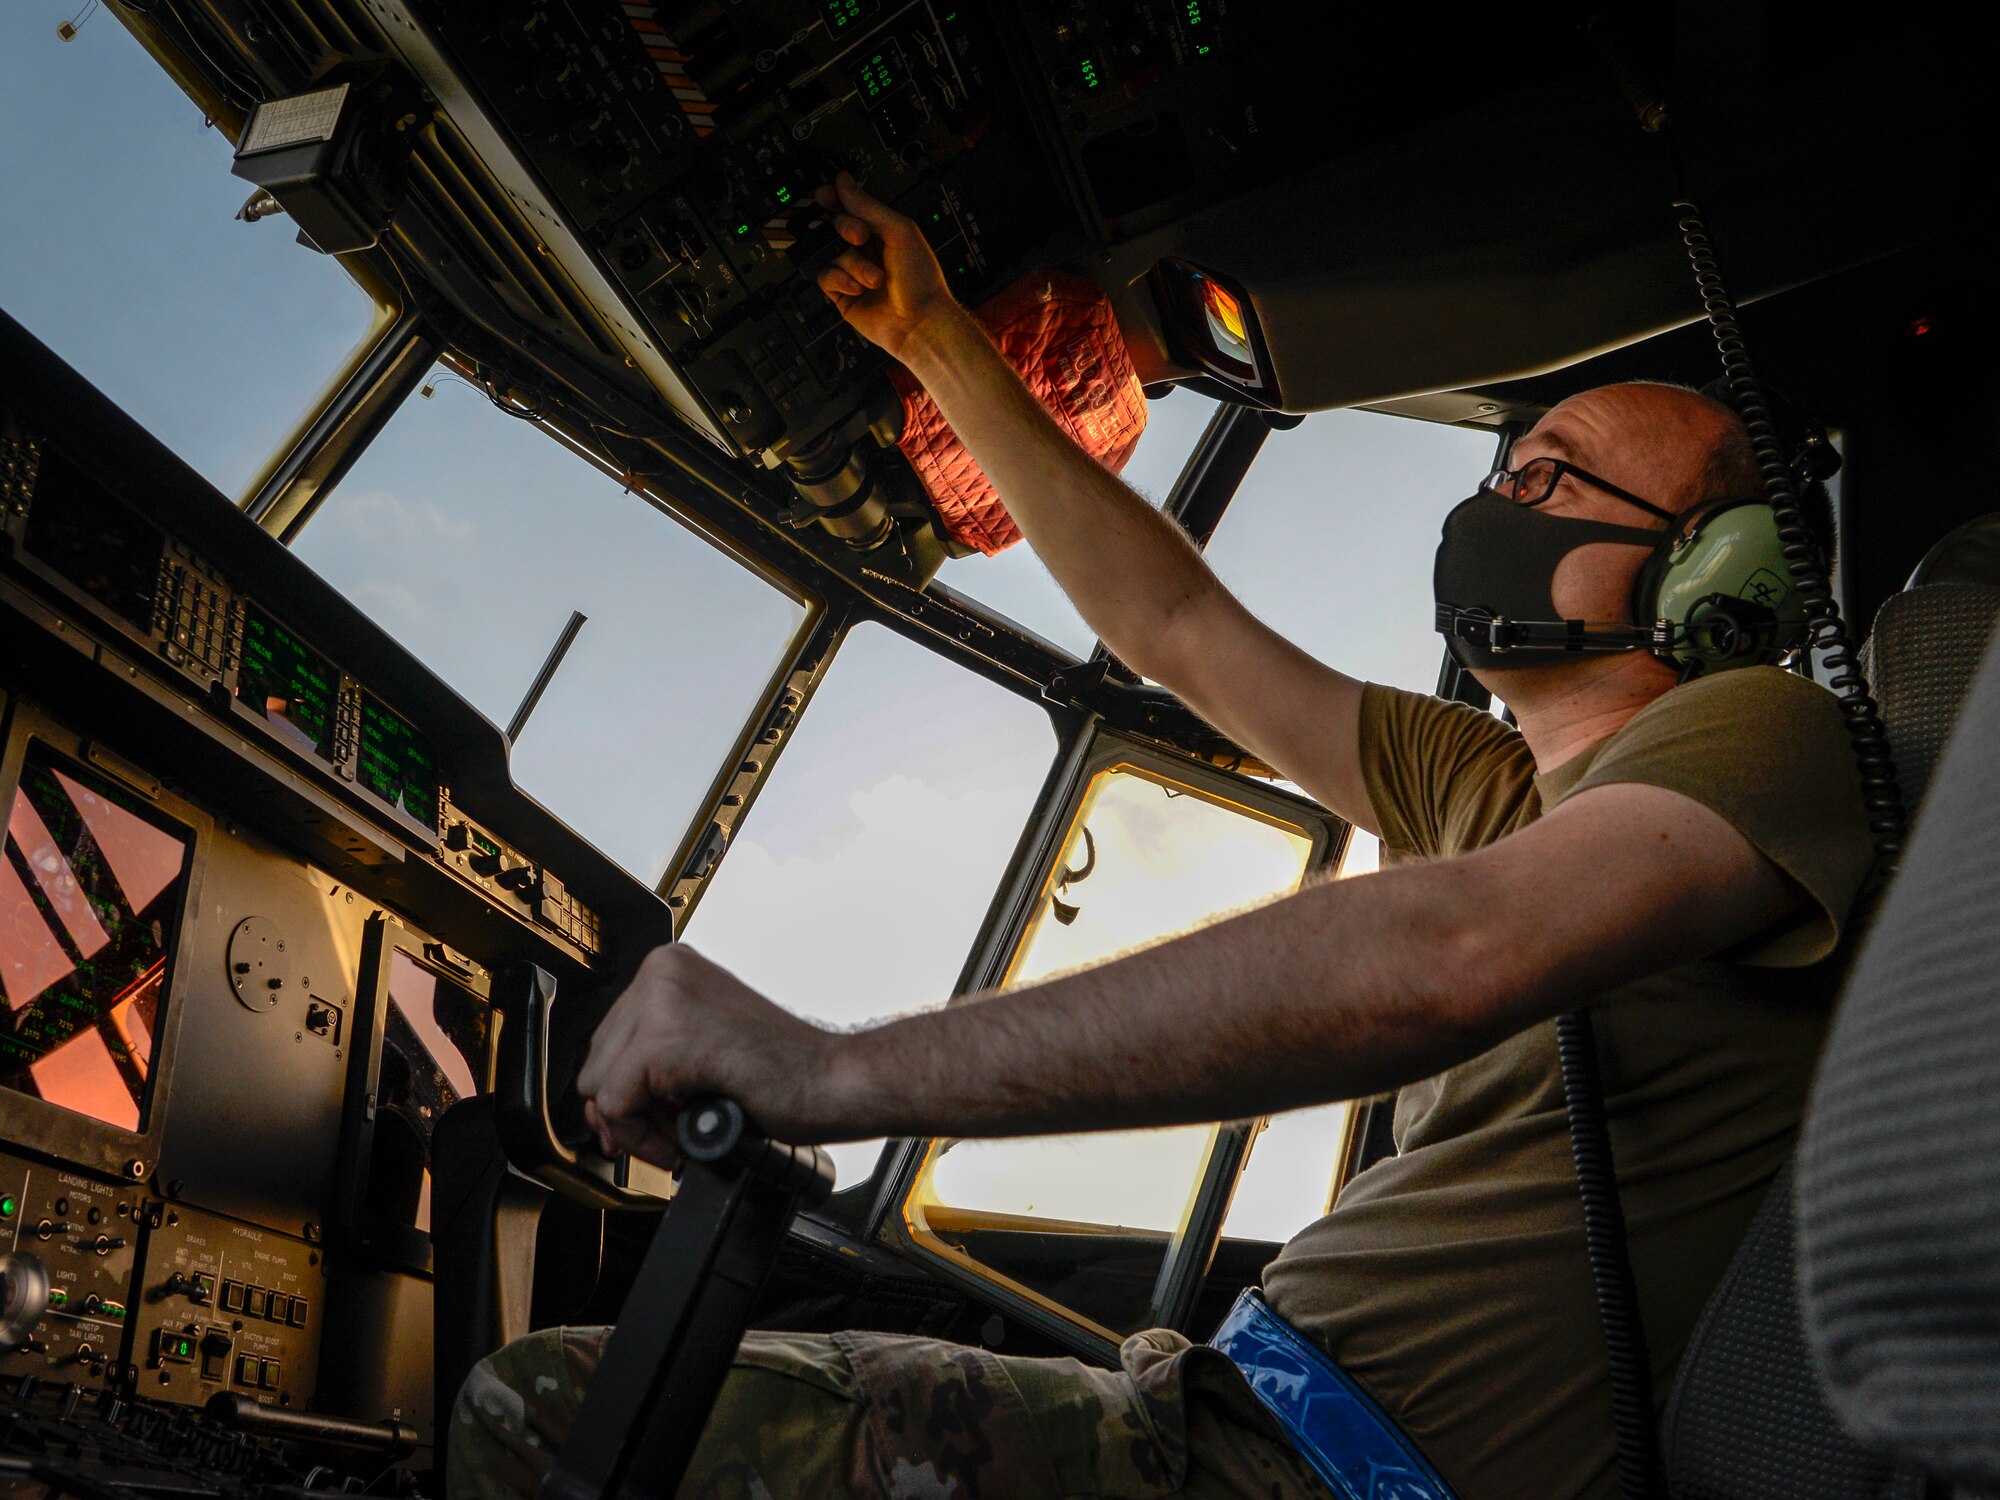 Staff Sgt. Joshua Smith, 374th Aircraft Maintenance Squadron integrated flight controls systems craftsman from Yokota Air Base, Japan, goes over the C-130J Super Hercules’ instruments during a pre-flight inspection during Operation Christmas Drop 2020 at Andersen Air Force Base, Guam, Dec. 9.